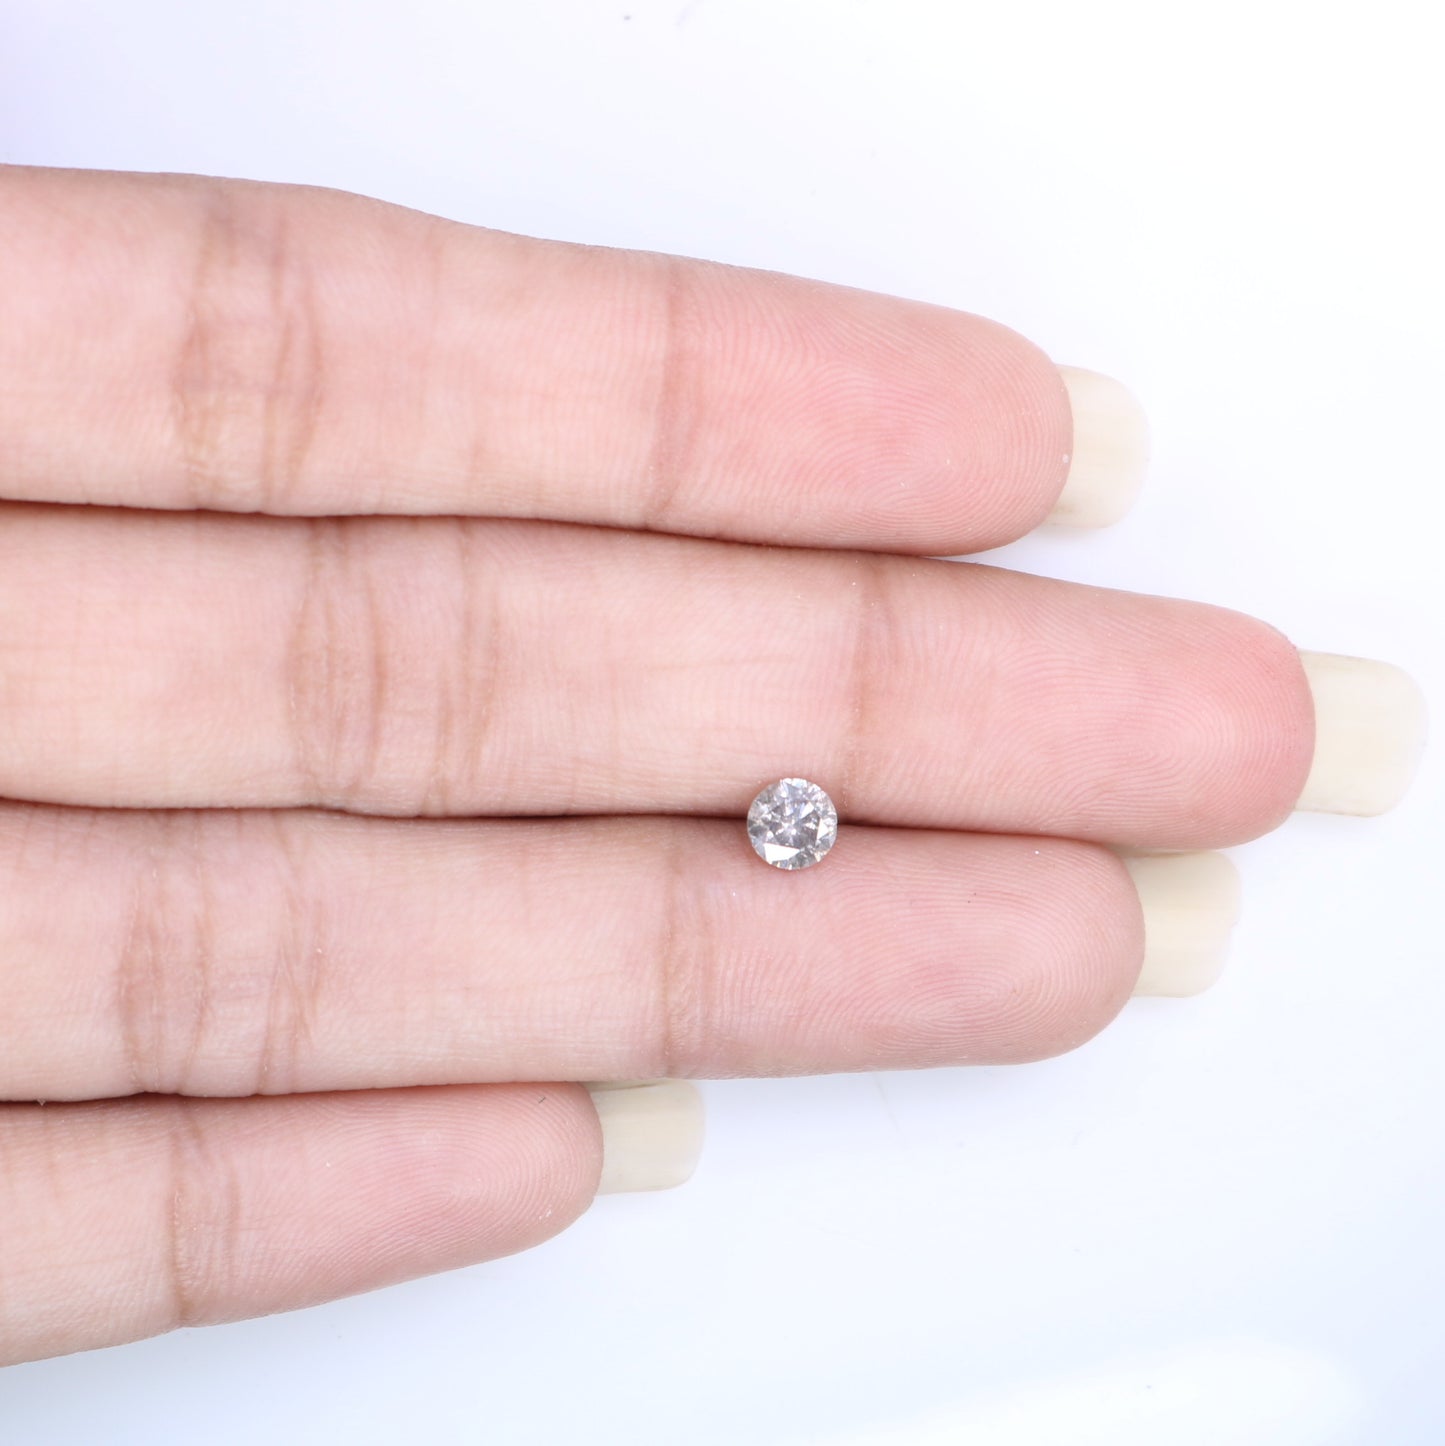 0.40 CT Salt And Pepper 4.60 x 2.90 MM Round Brilliant Cut Loose Diamond For Engagement Ring